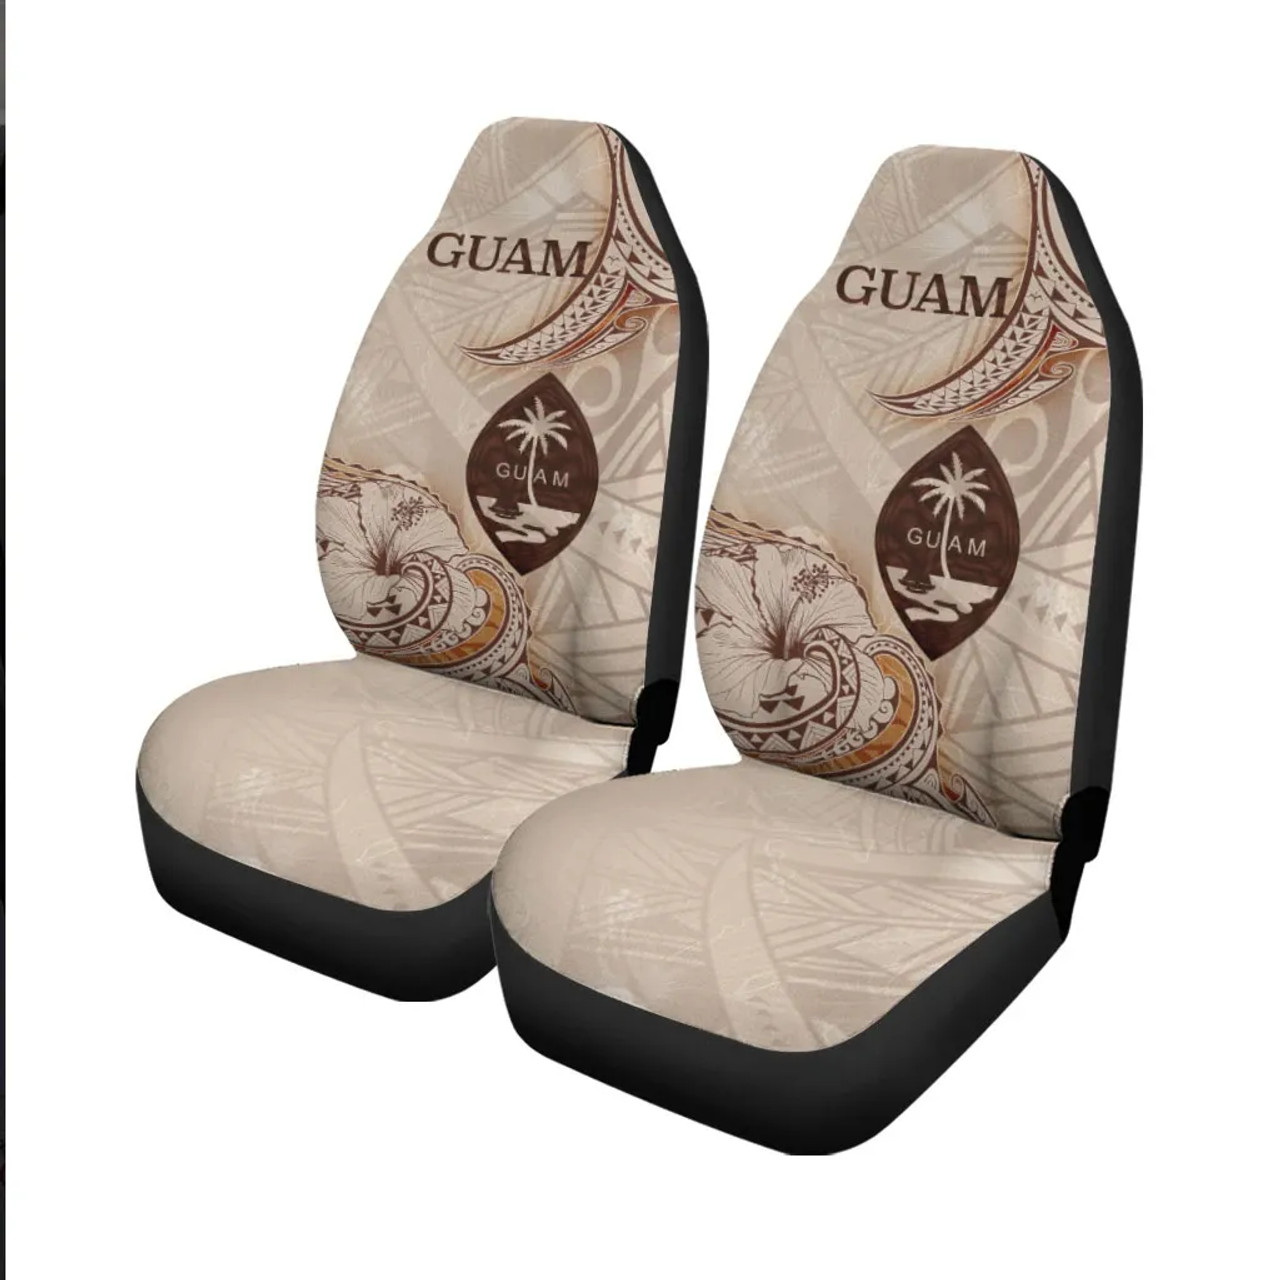 Guam Car Seat Cover - Hibiscus Flowers Vintage Style